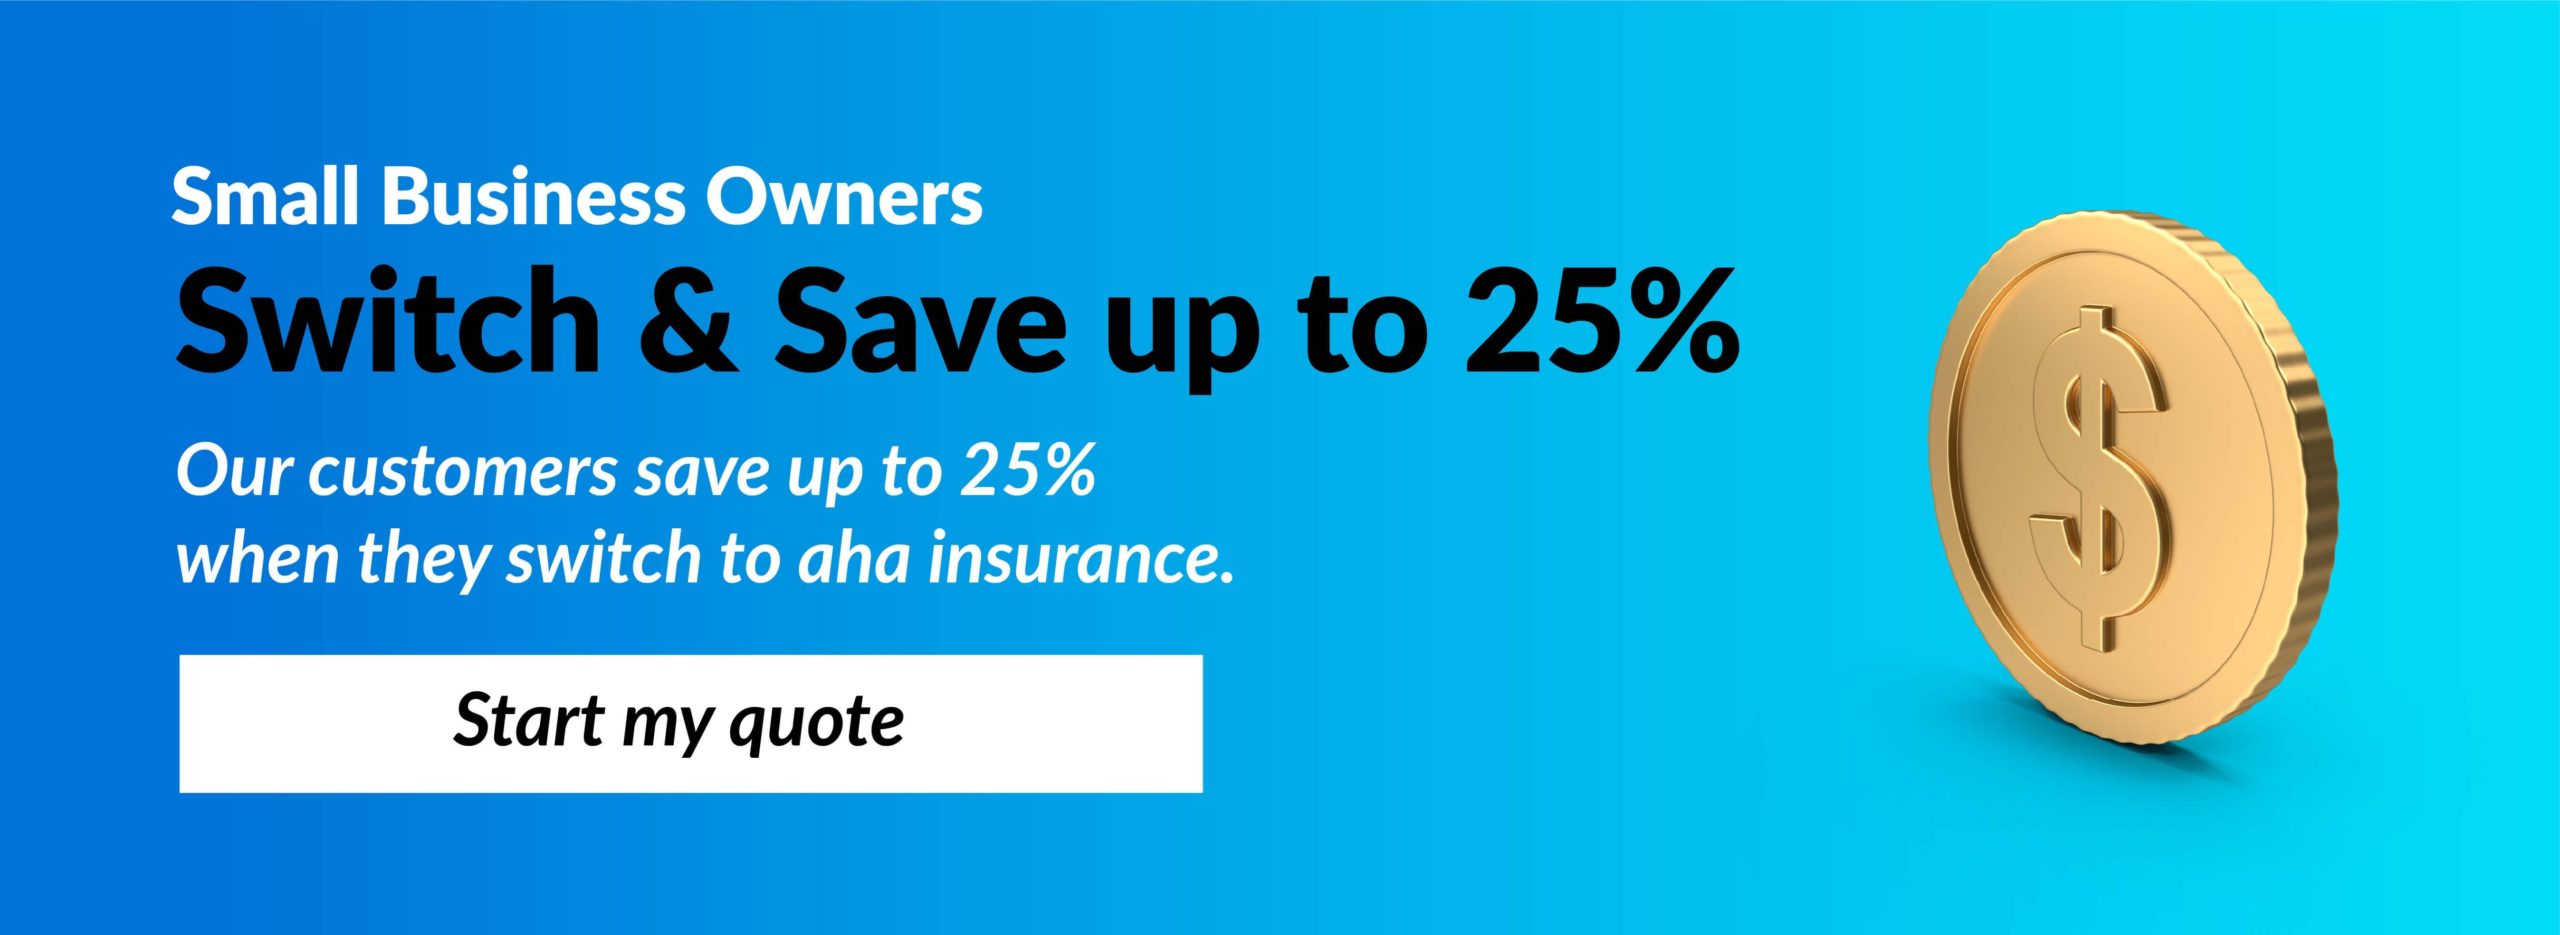 Small Business Owners Switch & Save up to 25% Our customers save up to 25% when they switch to aha insurance. Start my quote